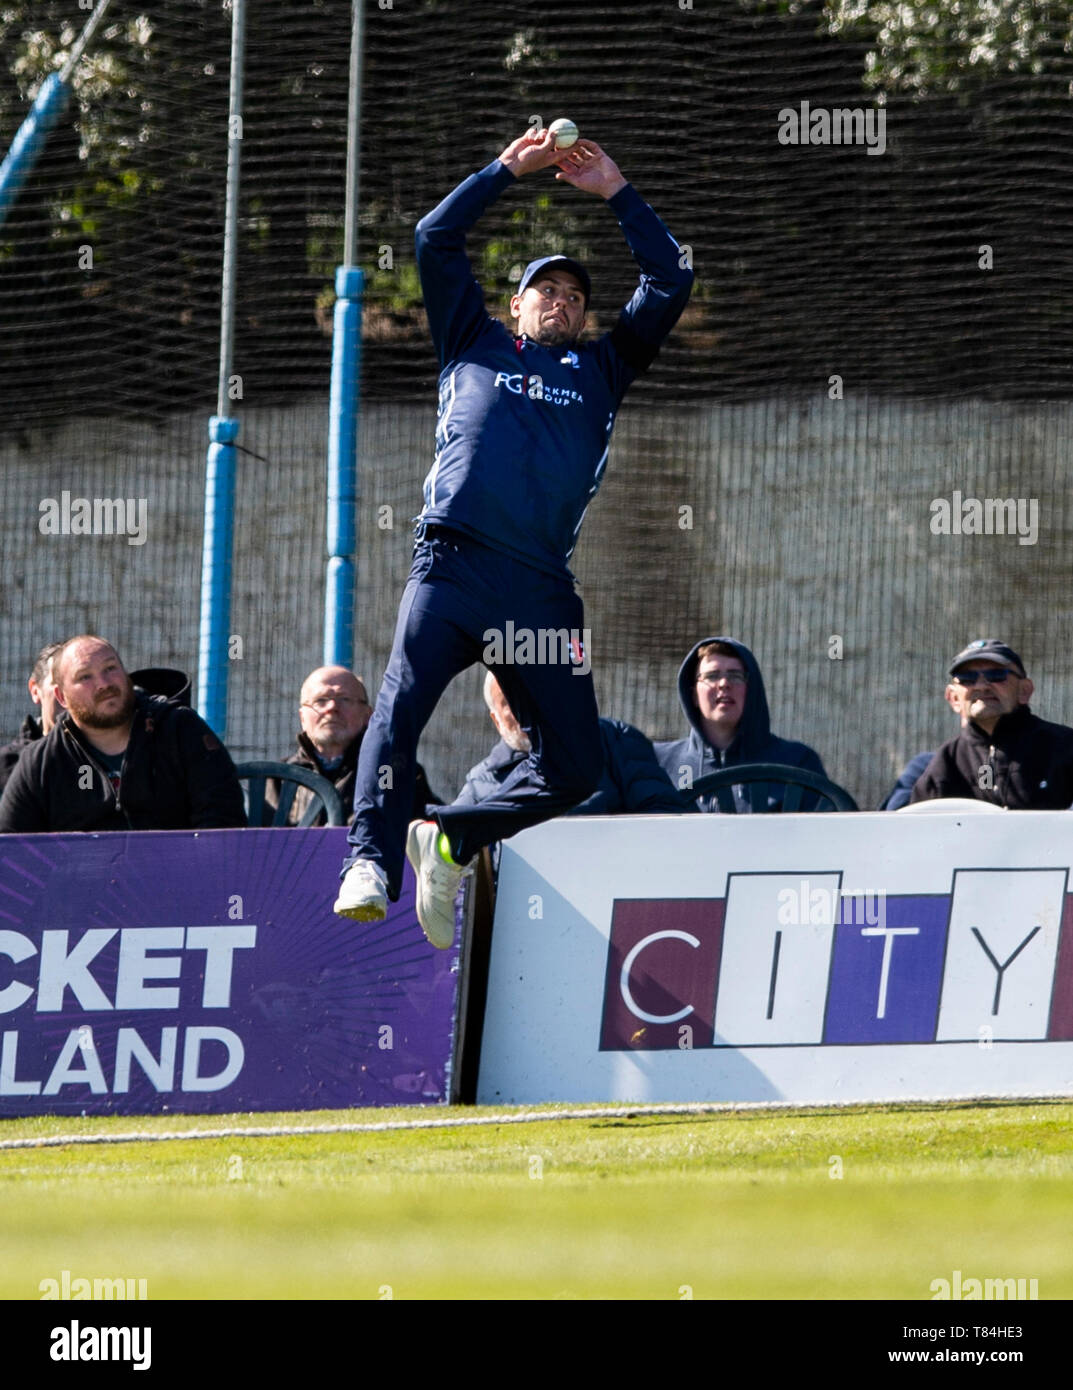 The Grange, Edinburgh, Midlothian, UK. 10th May 2019. Scotland v Afghanistan ODI. Pic shows: Almost a brilliant catch on the boundary by Scotland's Calum MacLeod, during the second innings as Scotland take on Afghanistan in a One Day International at the Grange, Edinburgh Credit: Ian Jacobs/Alamy Live News Stock Photo